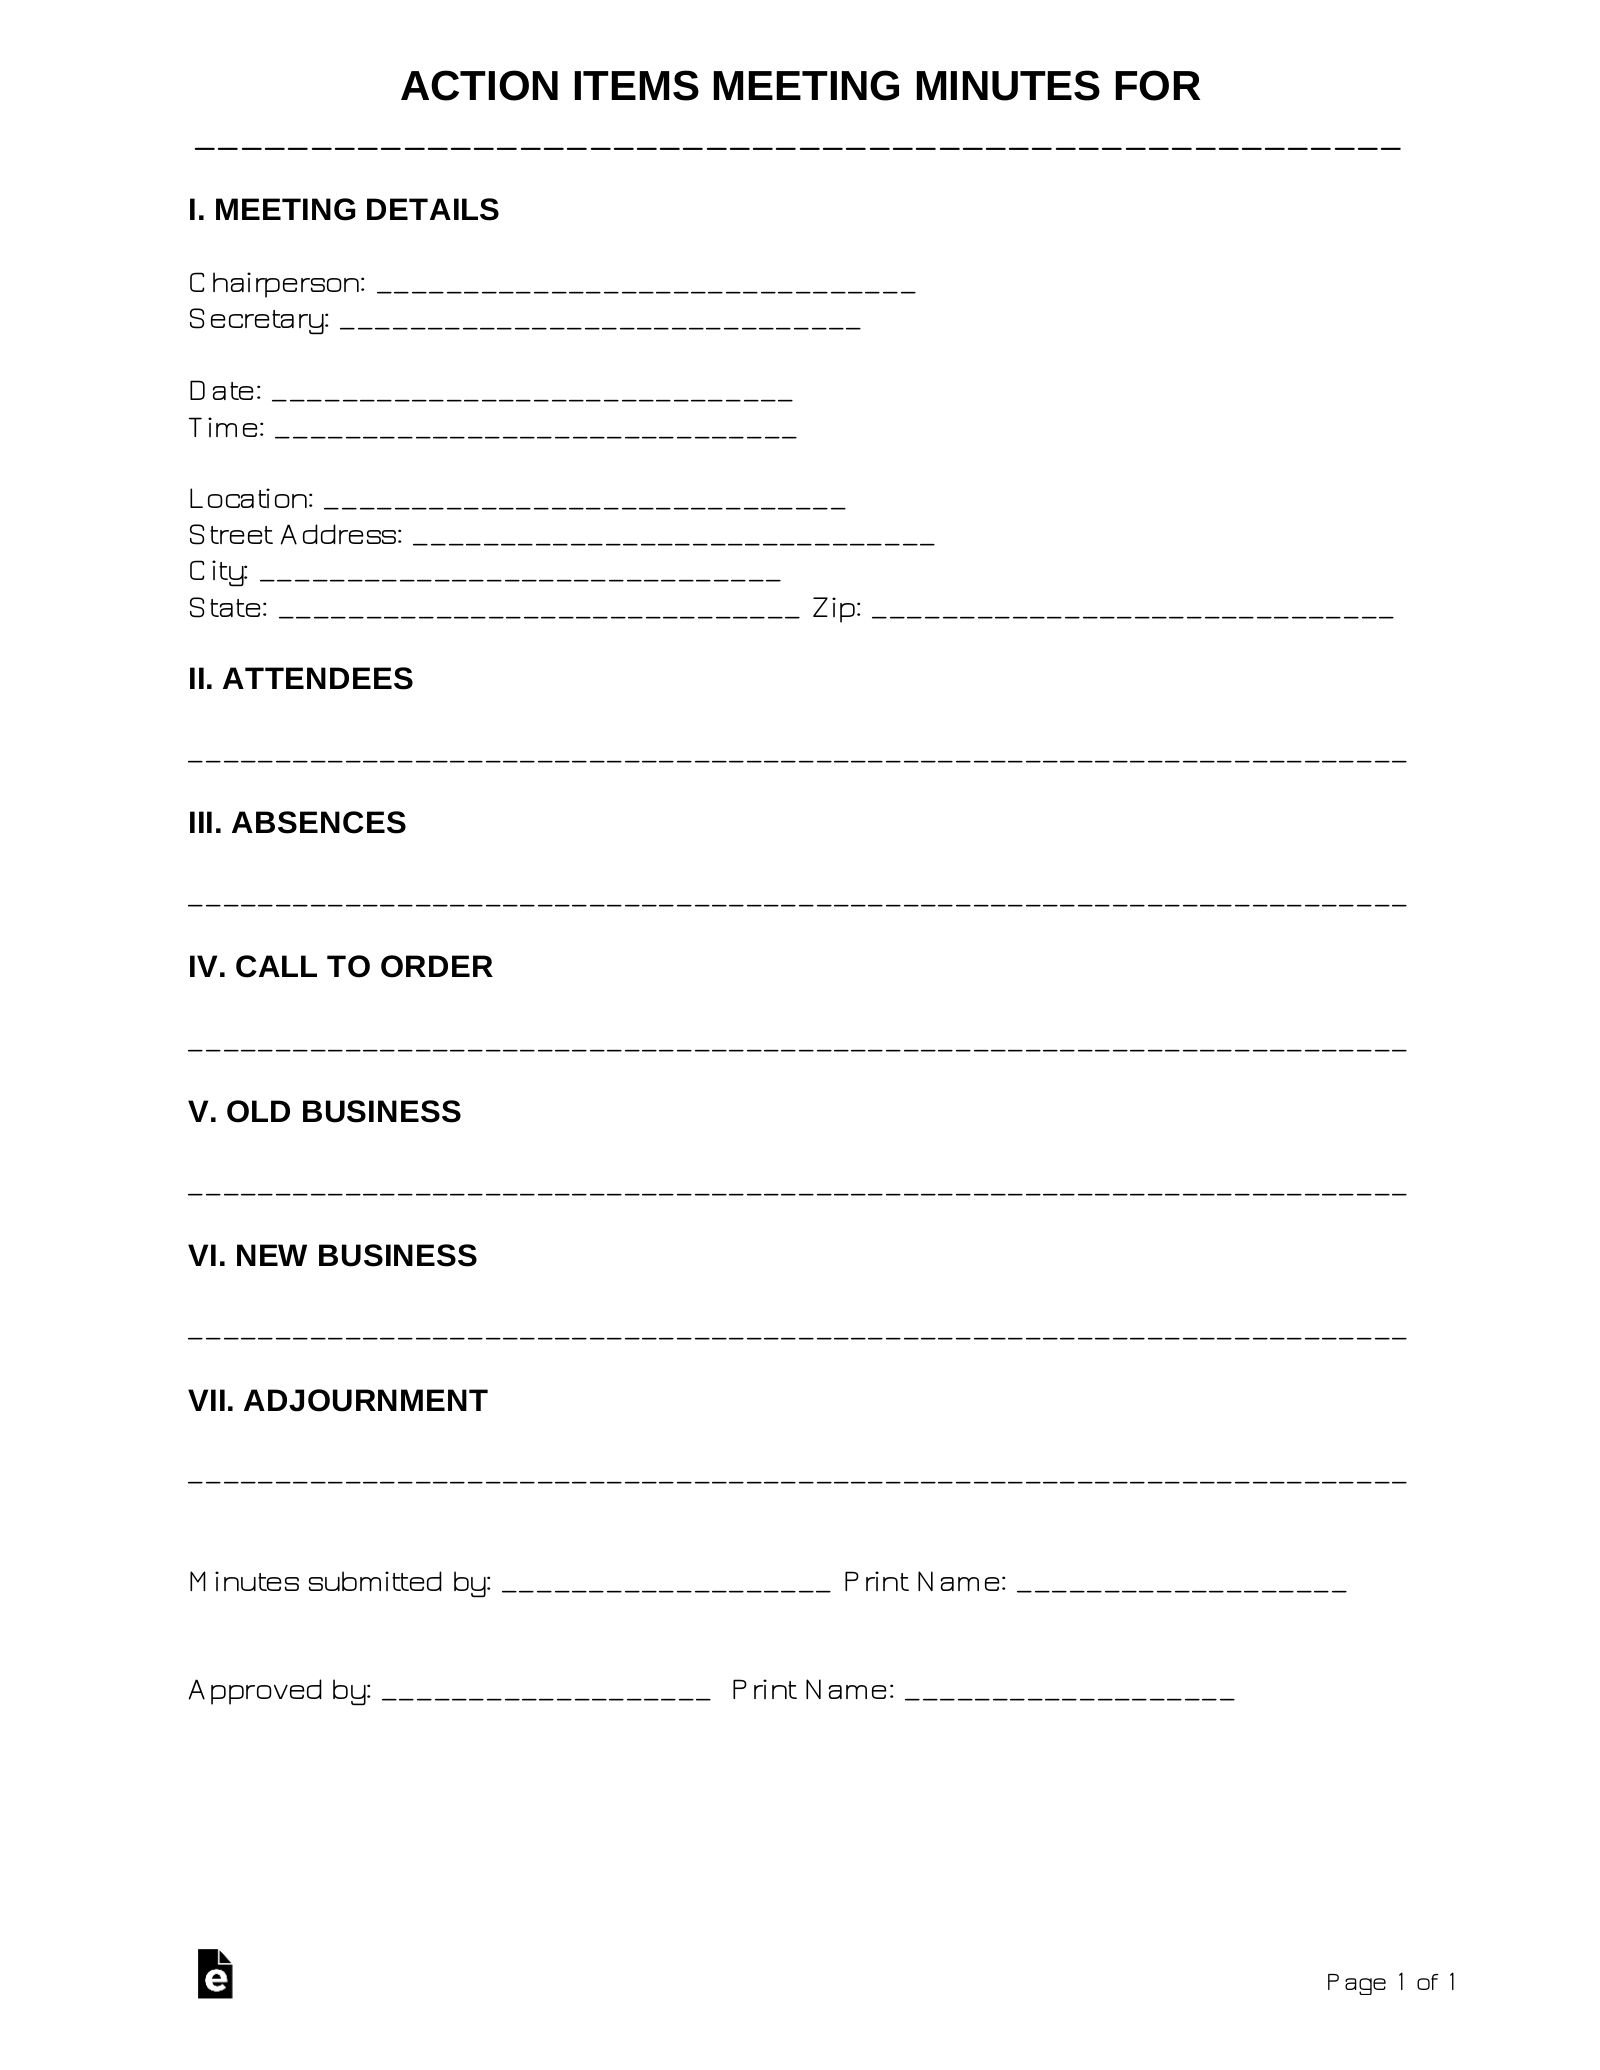 Free Action Items Meeting Minutes Template Sample Word Pdf Eforms